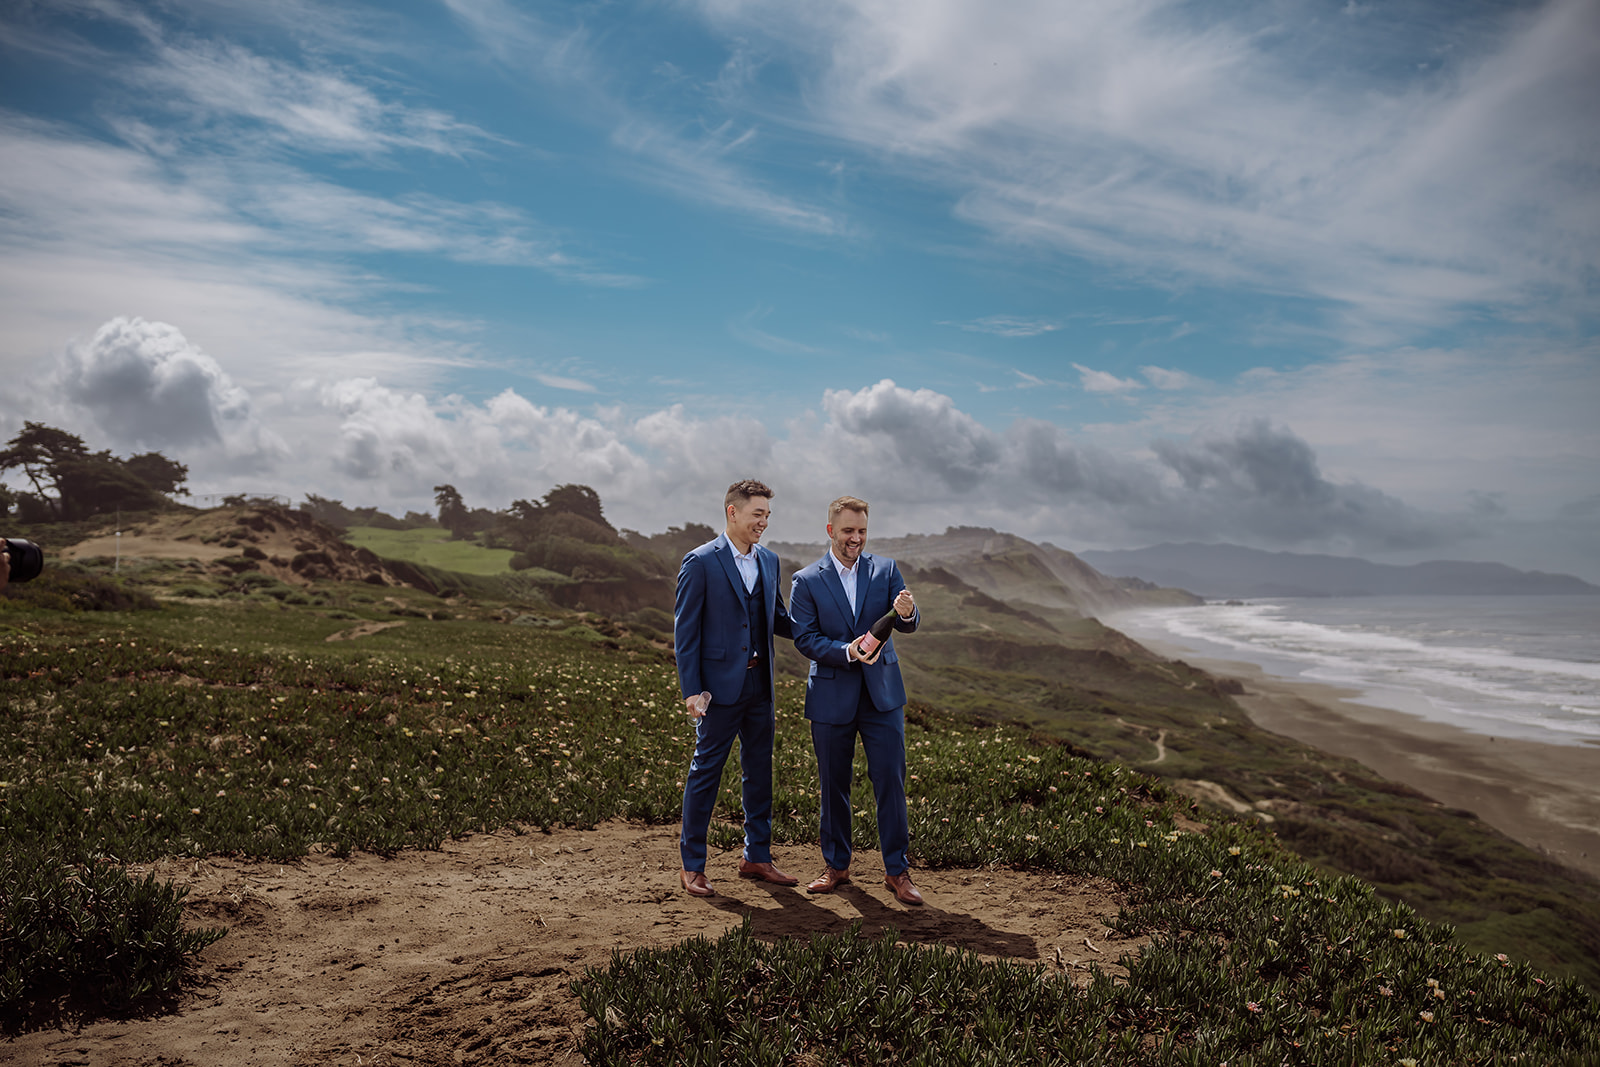 This is a picture of a same sex gay couple on their wedding day/elopement day as the two grooms open a champagne bottle to pour themselves champagne in their glasses while they celebrate their wedding day in their classy blue wedding tuxes at Fort Funston, CA which was their intimate wedding venue. This photo was taken by an inclusive and intimate wedding and elopement photographer, Xilo Photography, Kati Douglas who is based in Oakland, California in the bay area.